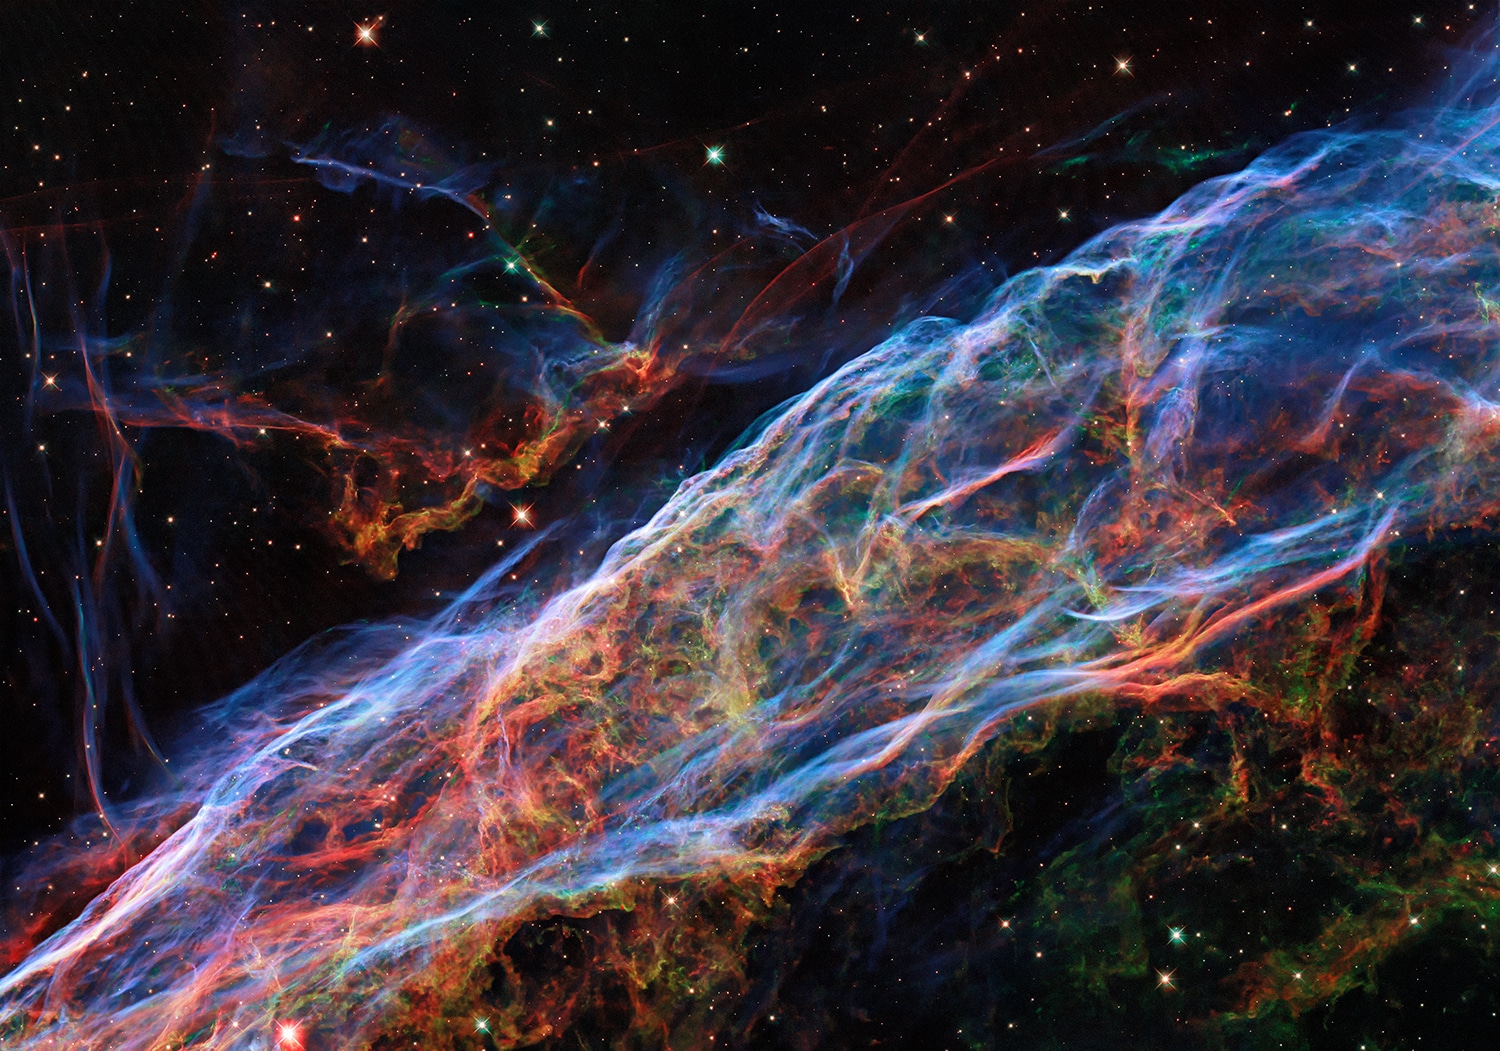 Hubble captured an incredible view of the Veil Nebula